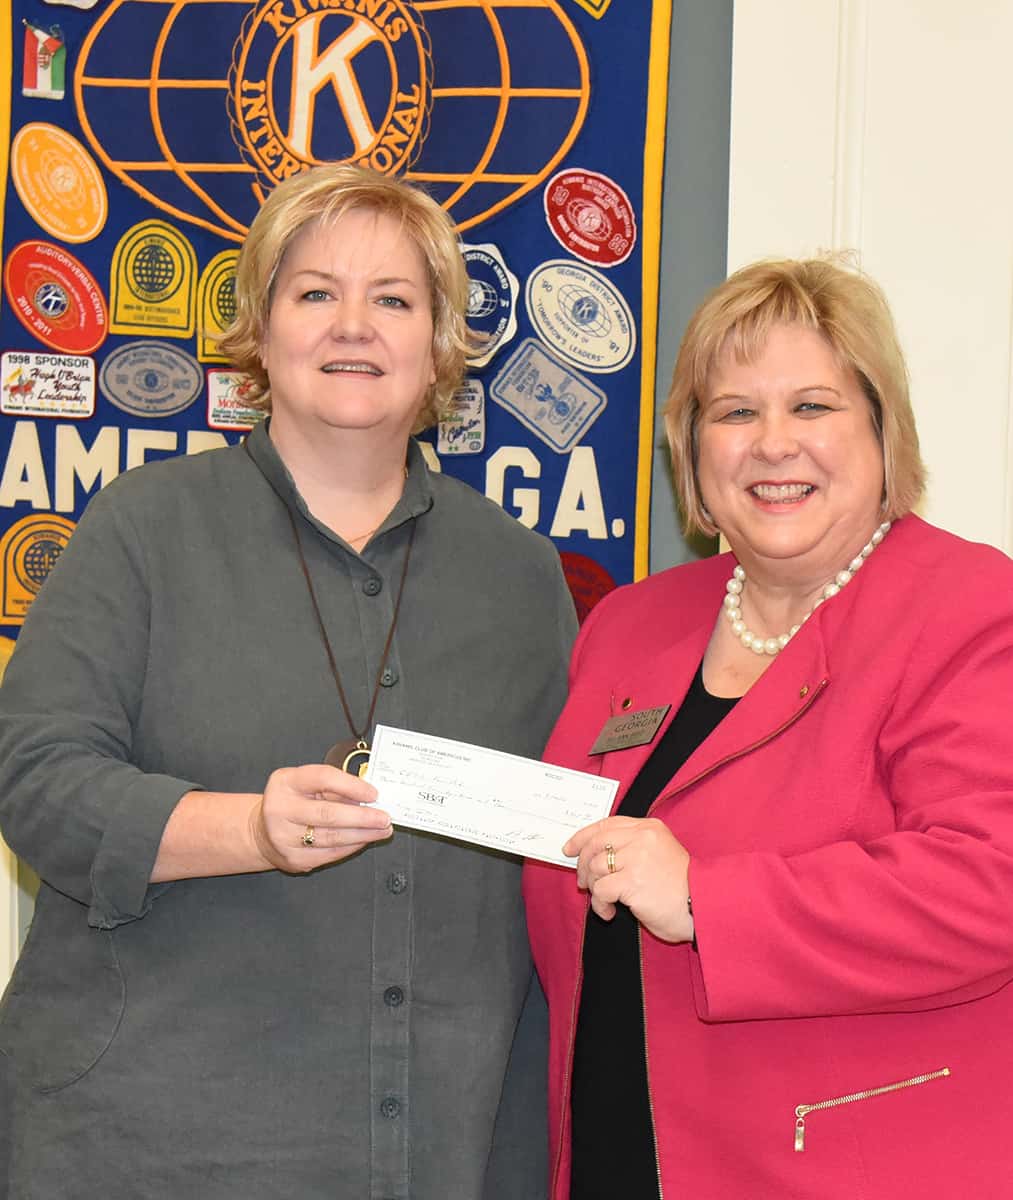 Shown above (l to r) are Anne Isbell, President of the Americus Kiwanis Club, presenting SGTC Foundation Executive Director Su Ann Bird with a donation for the SGTC Foundation and the Jets Booster Club.